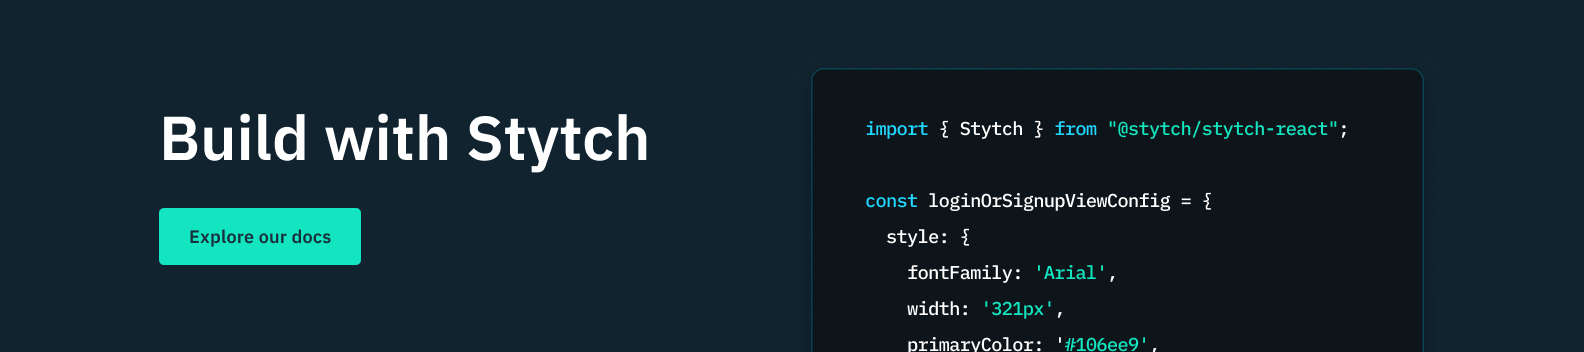 A code snippet next to the text "Build with Stytch – explore our docs" on a dark green background